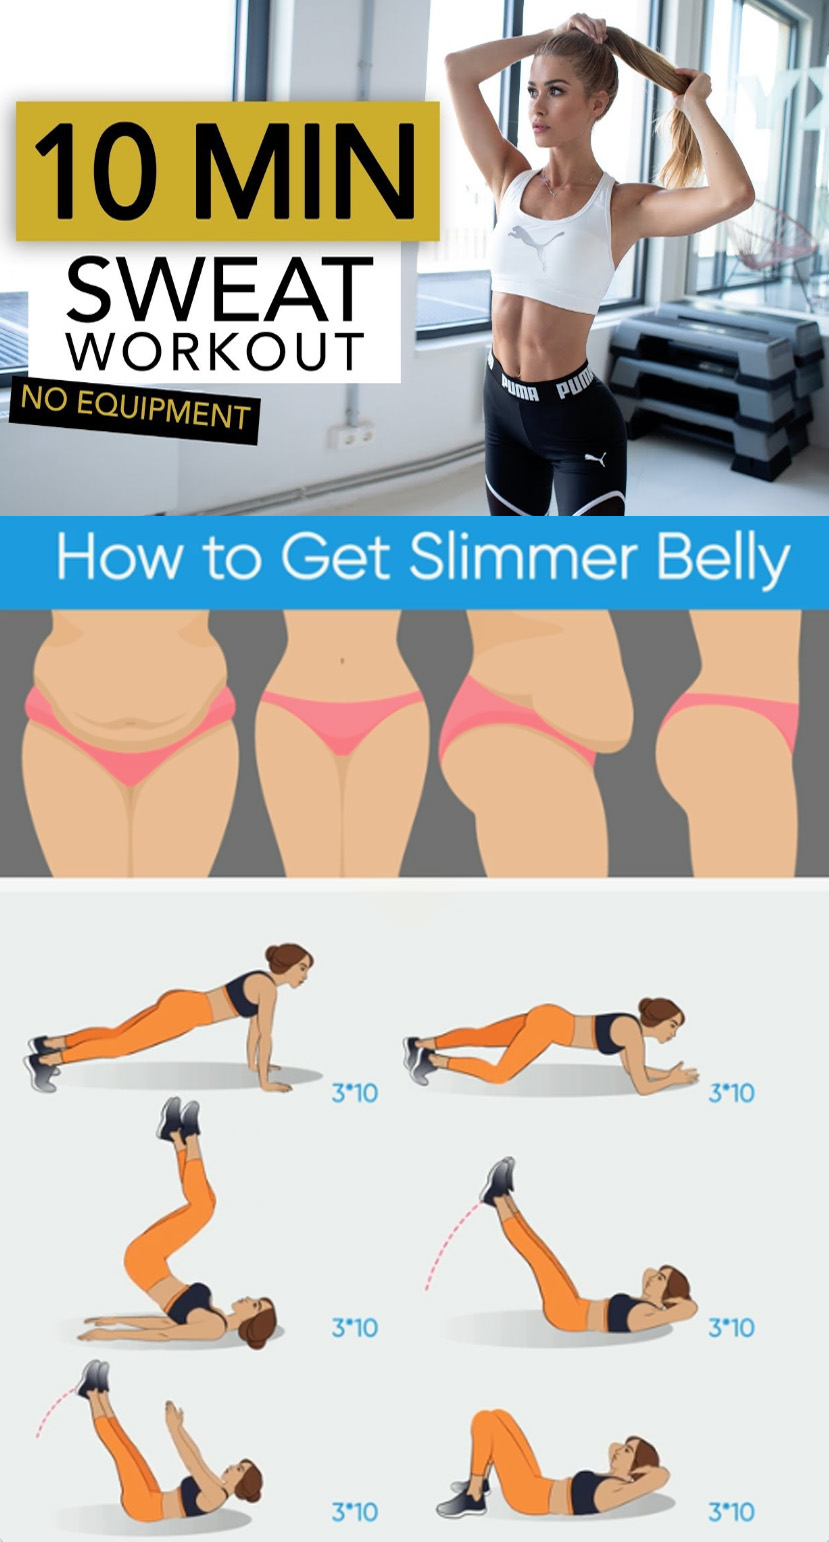 How to Get Slimmer Belly